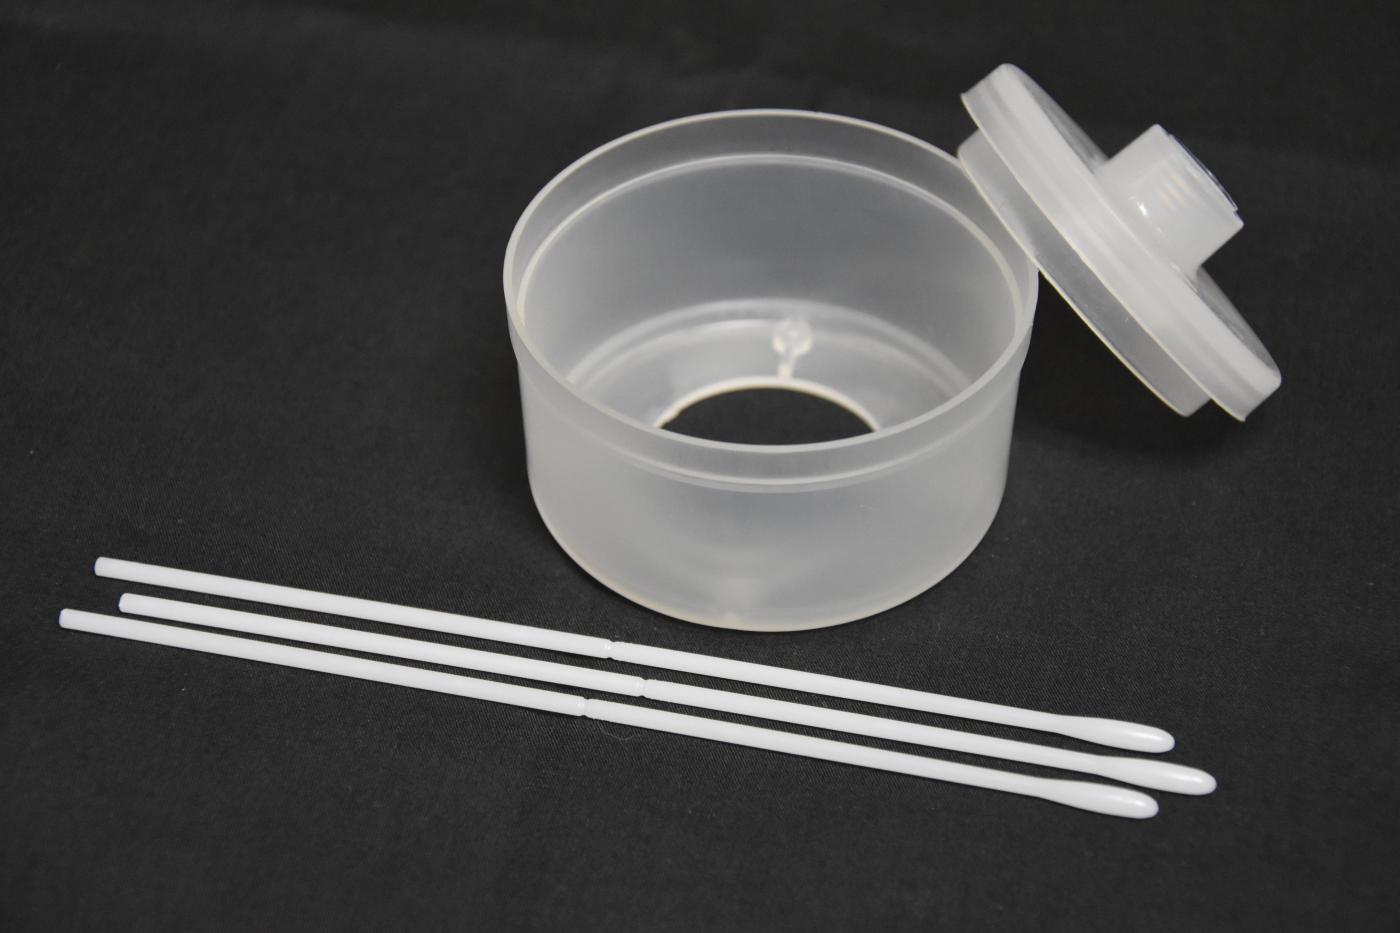 teel injection molded swabs and filter components.